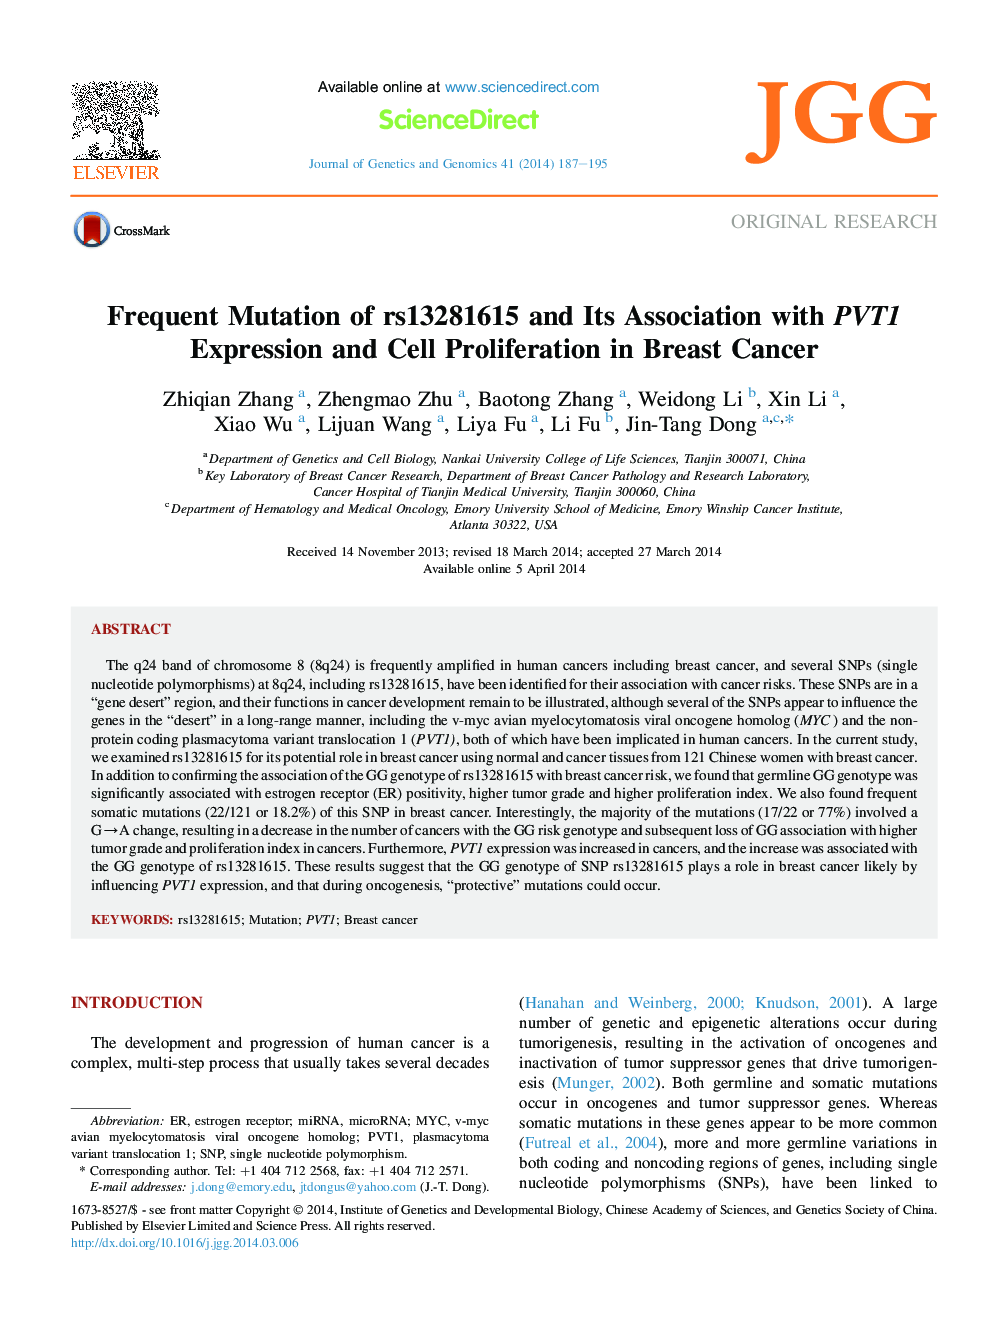 Frequent Mutation of rs13281615 and Its Association with PVT1 Expression and Cell Proliferation in Breast Cancer